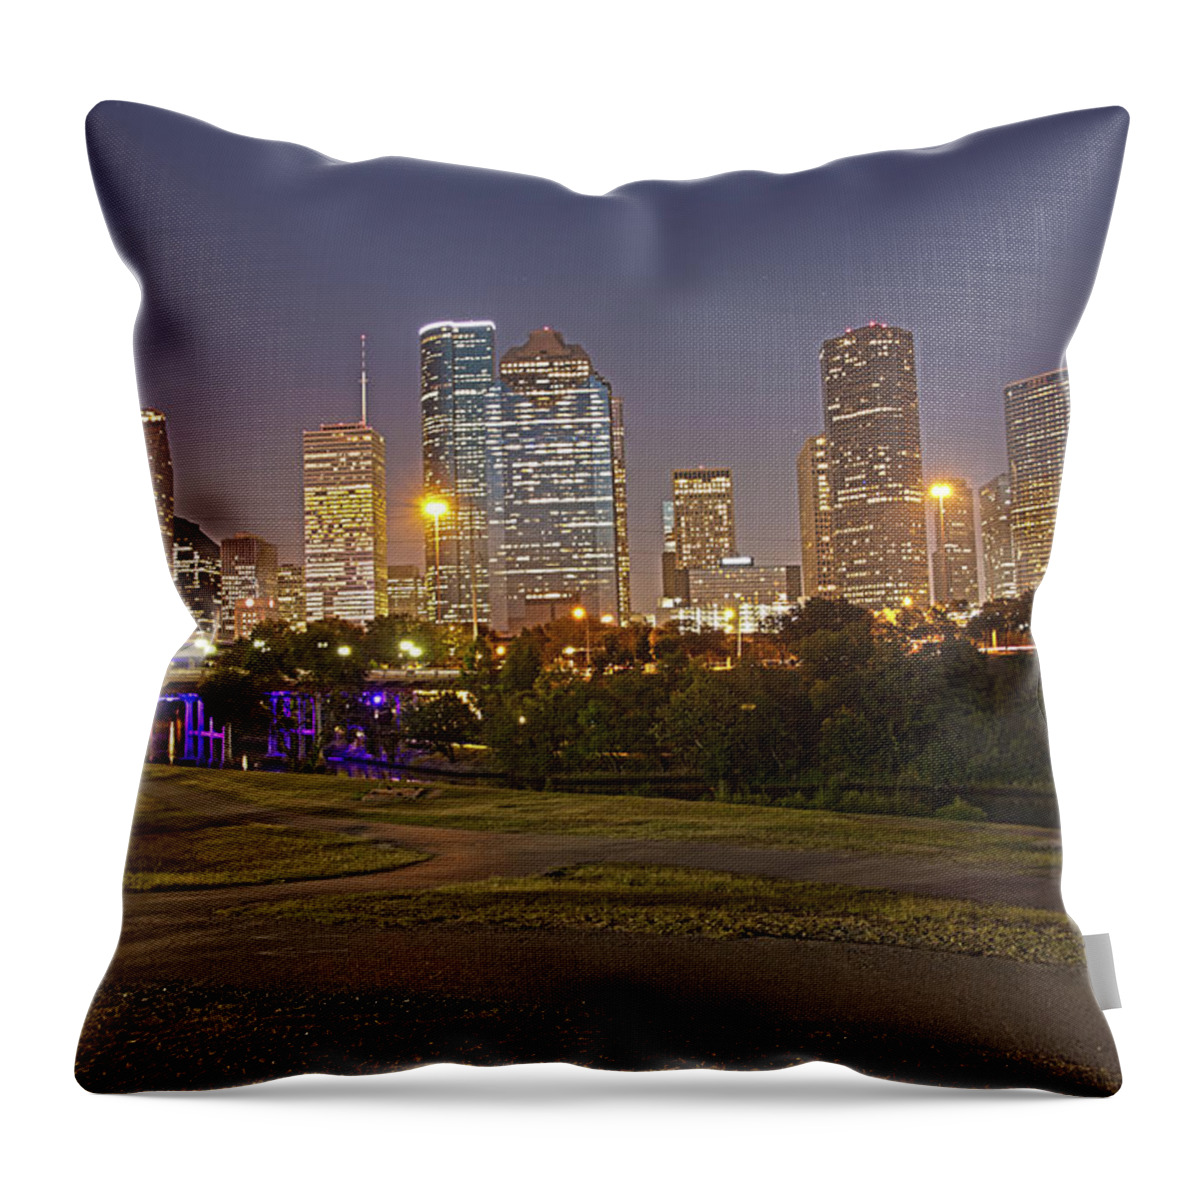 Cityscapes Throw Pillow featuring the photograph Houston Cityscape1 by James Woody